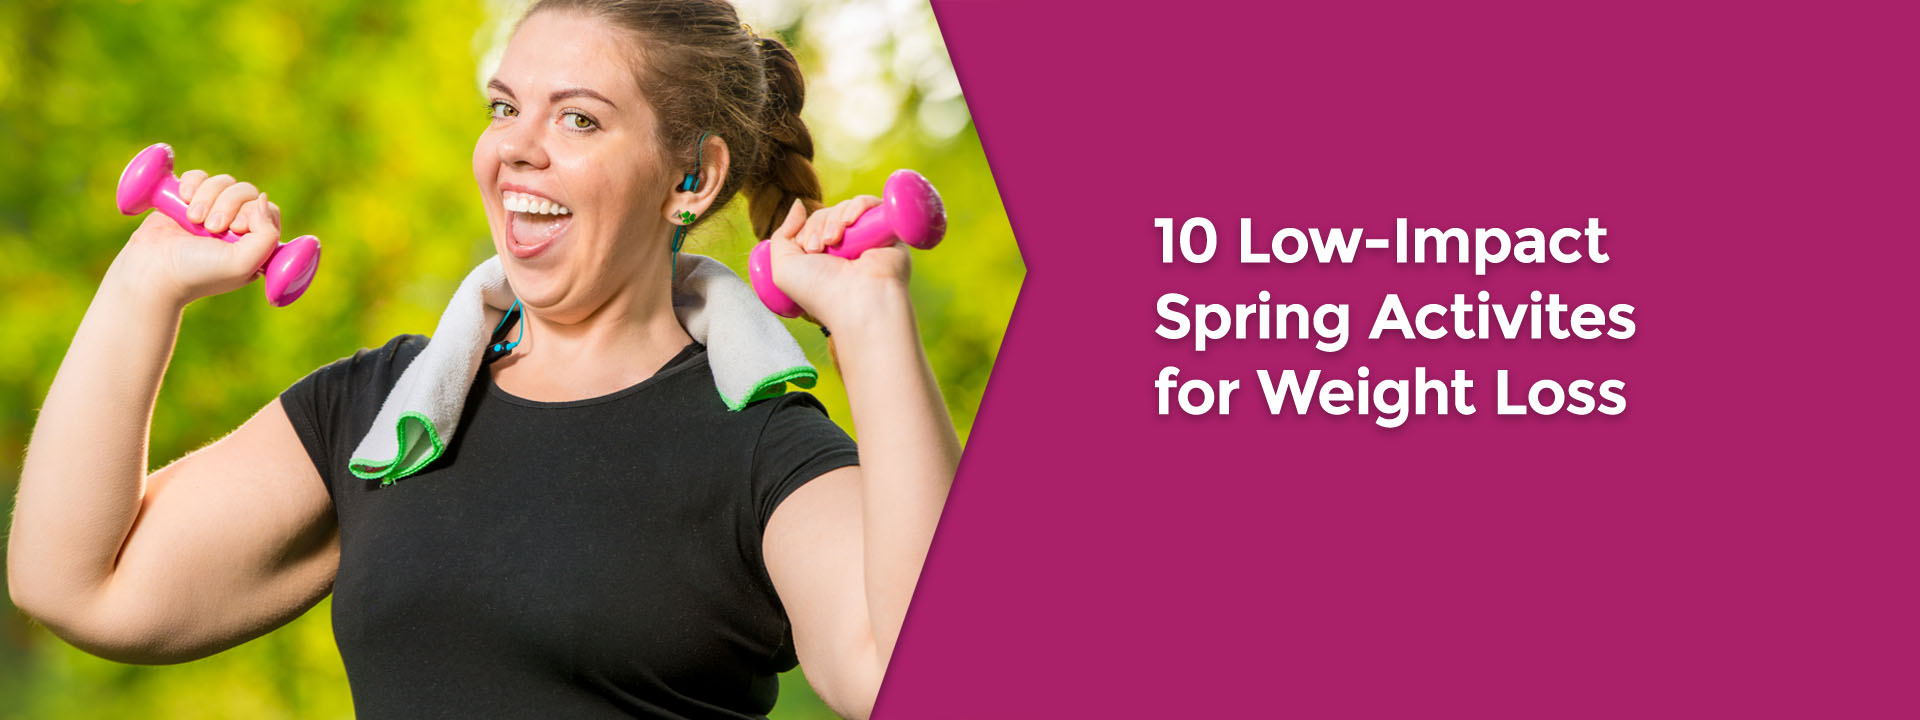 10 Low-Impact Spring Activities for Weight Loss & Overall Health